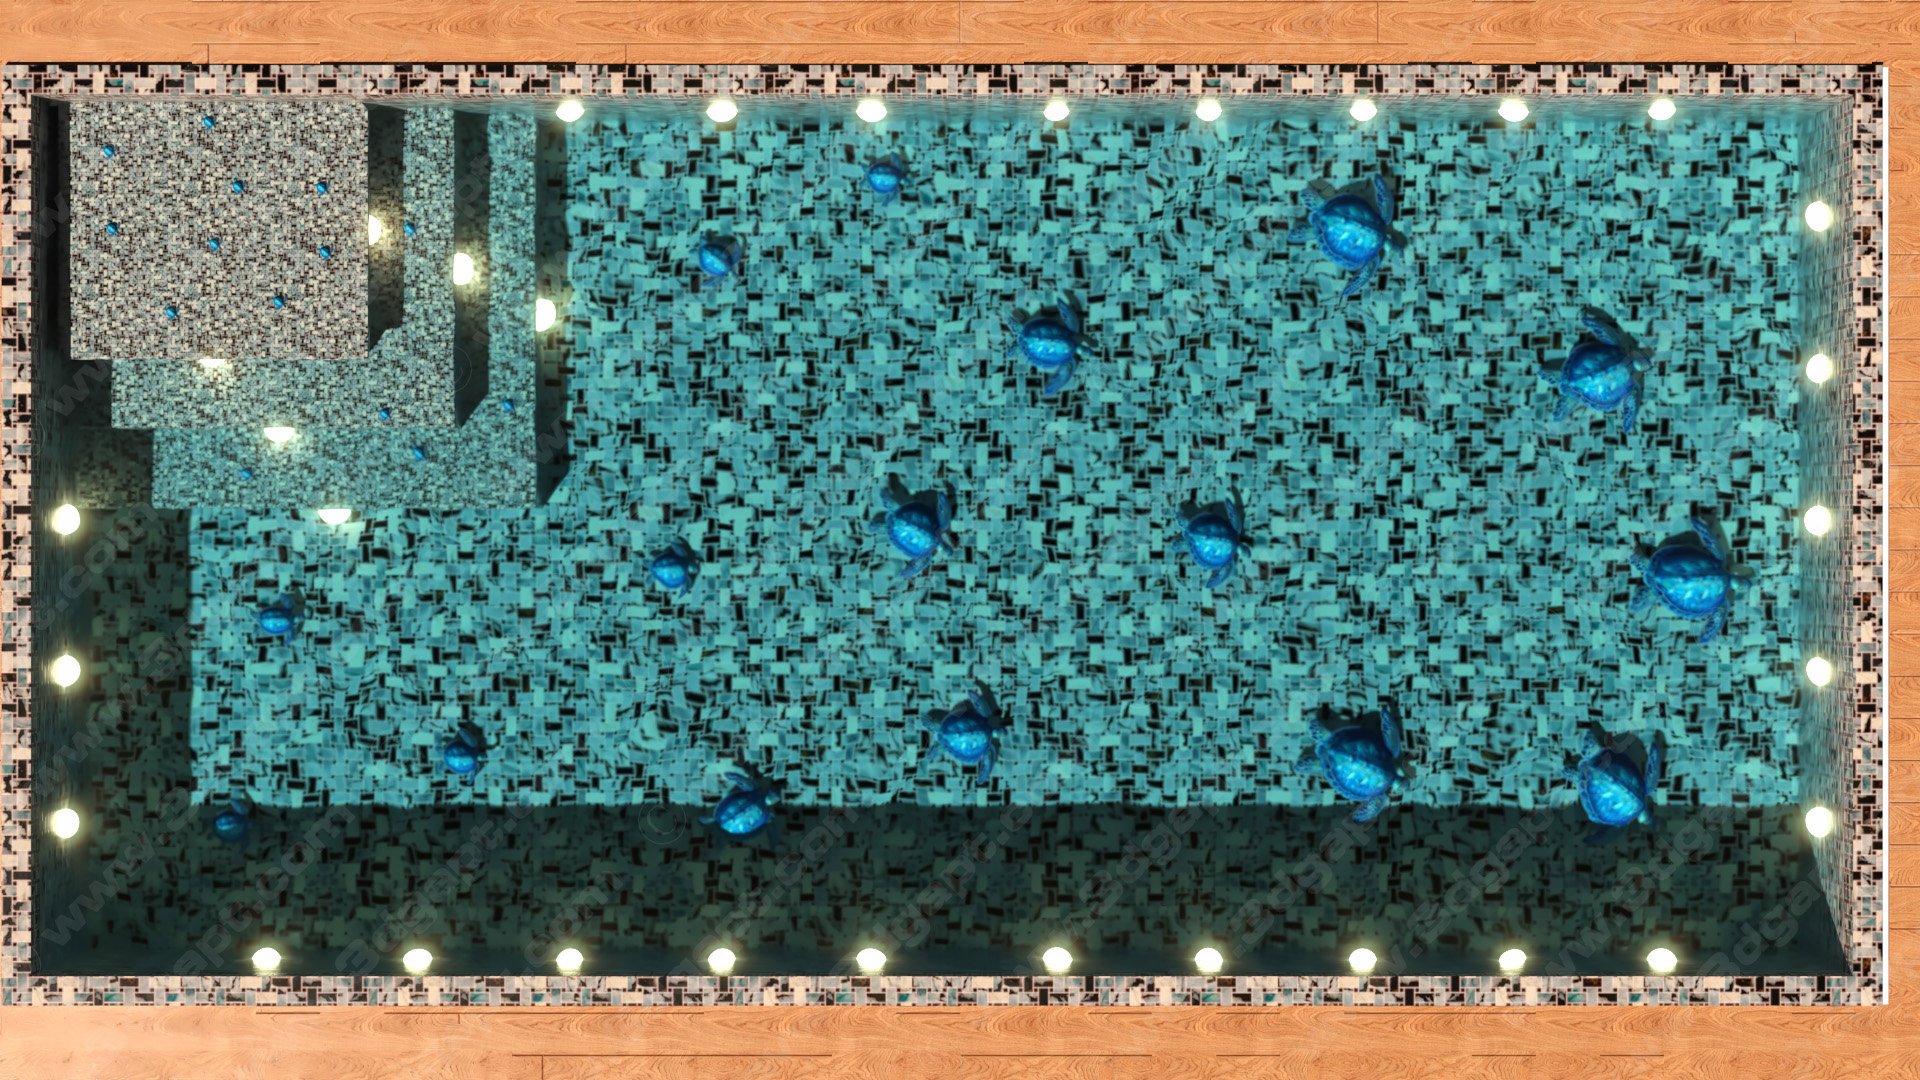 Pool with 3d turtles on the floor - Alternative version- 23